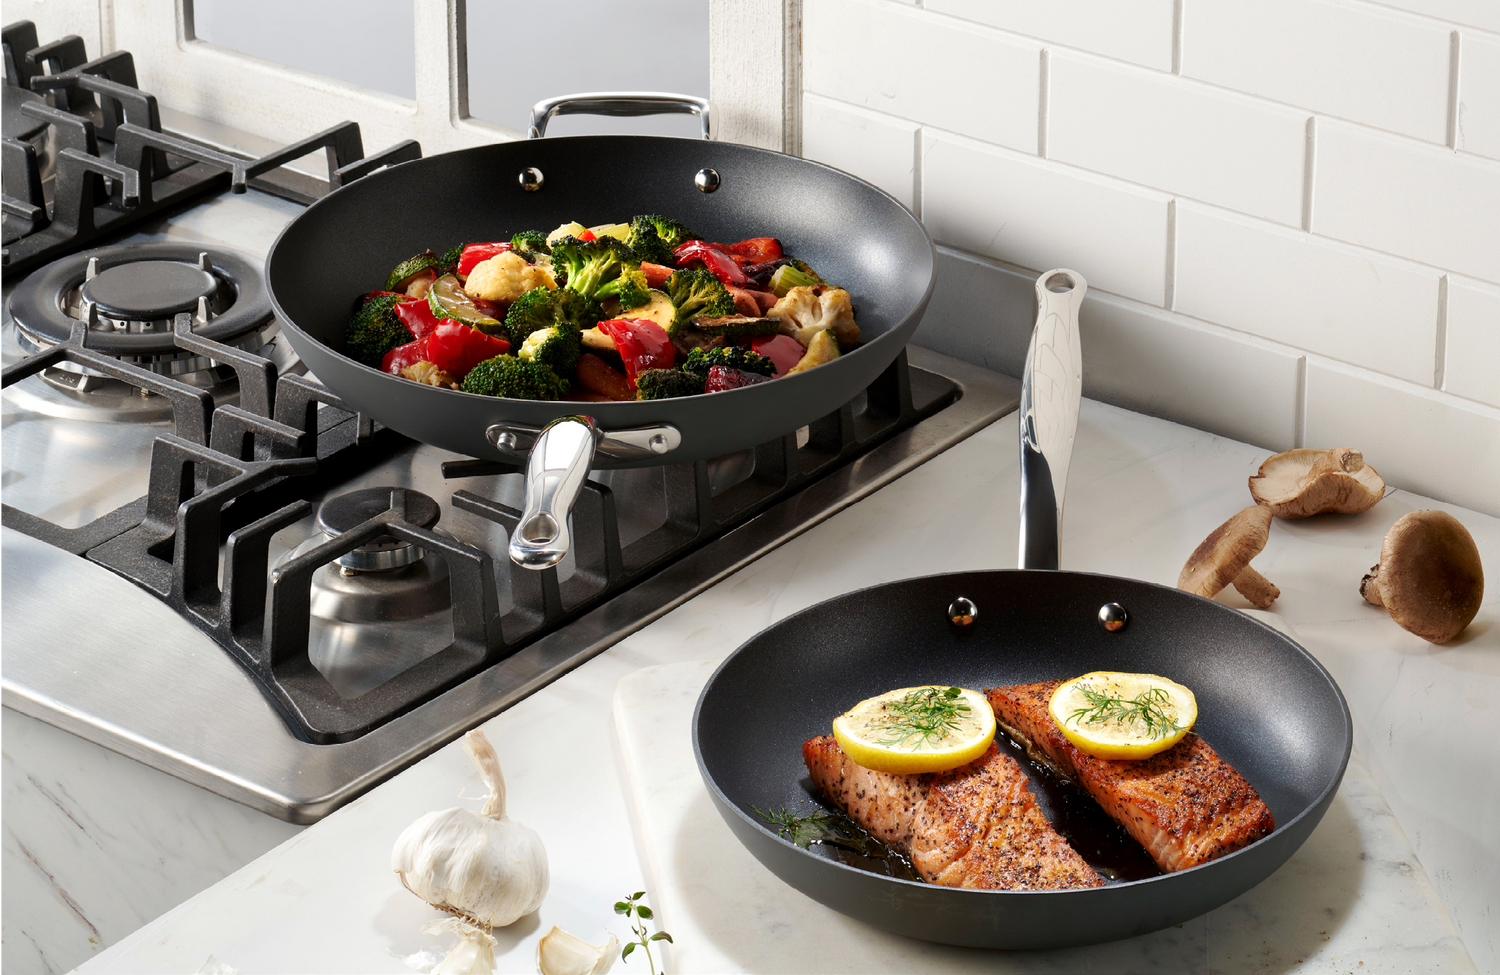 Legend Cookware 8” & 10” 5-Ply Stainless Steel-Clad Non-Stick Skillet Frying Pan 2-Piece Set - Professional Cookware 5-Ply Aluminum PFOA Free - Fry